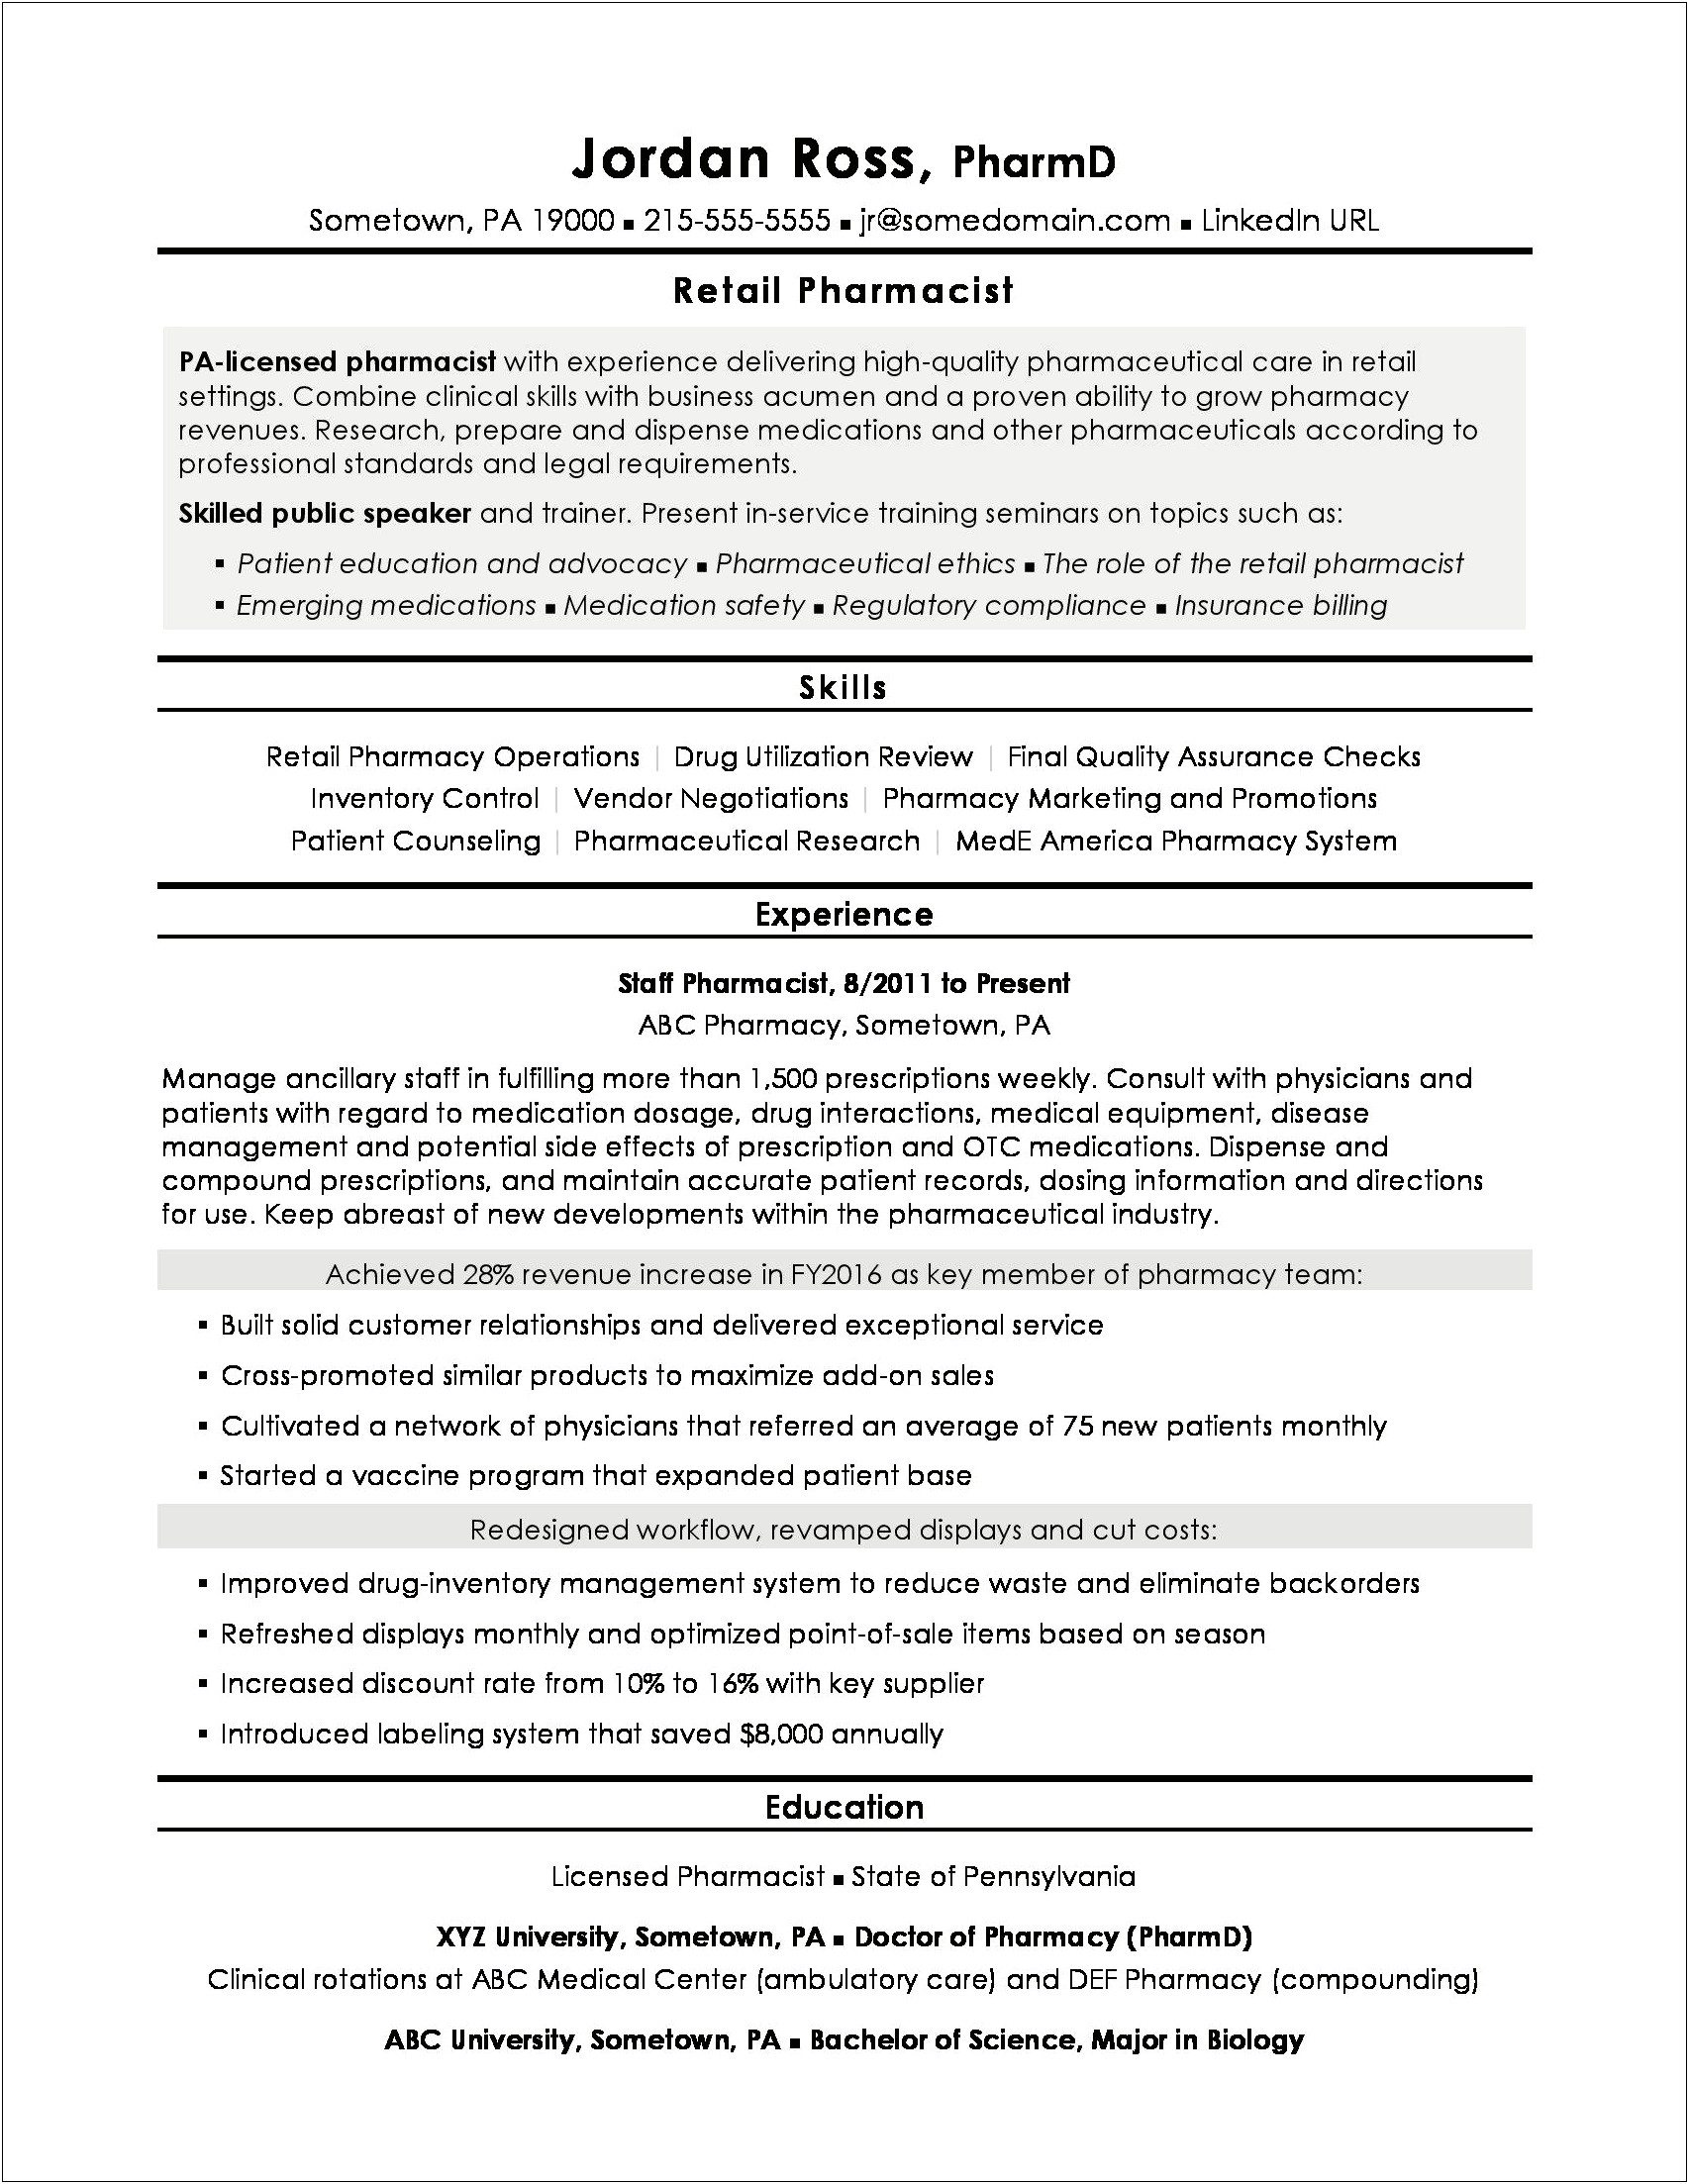 Resume Tips For State Pa Jobs